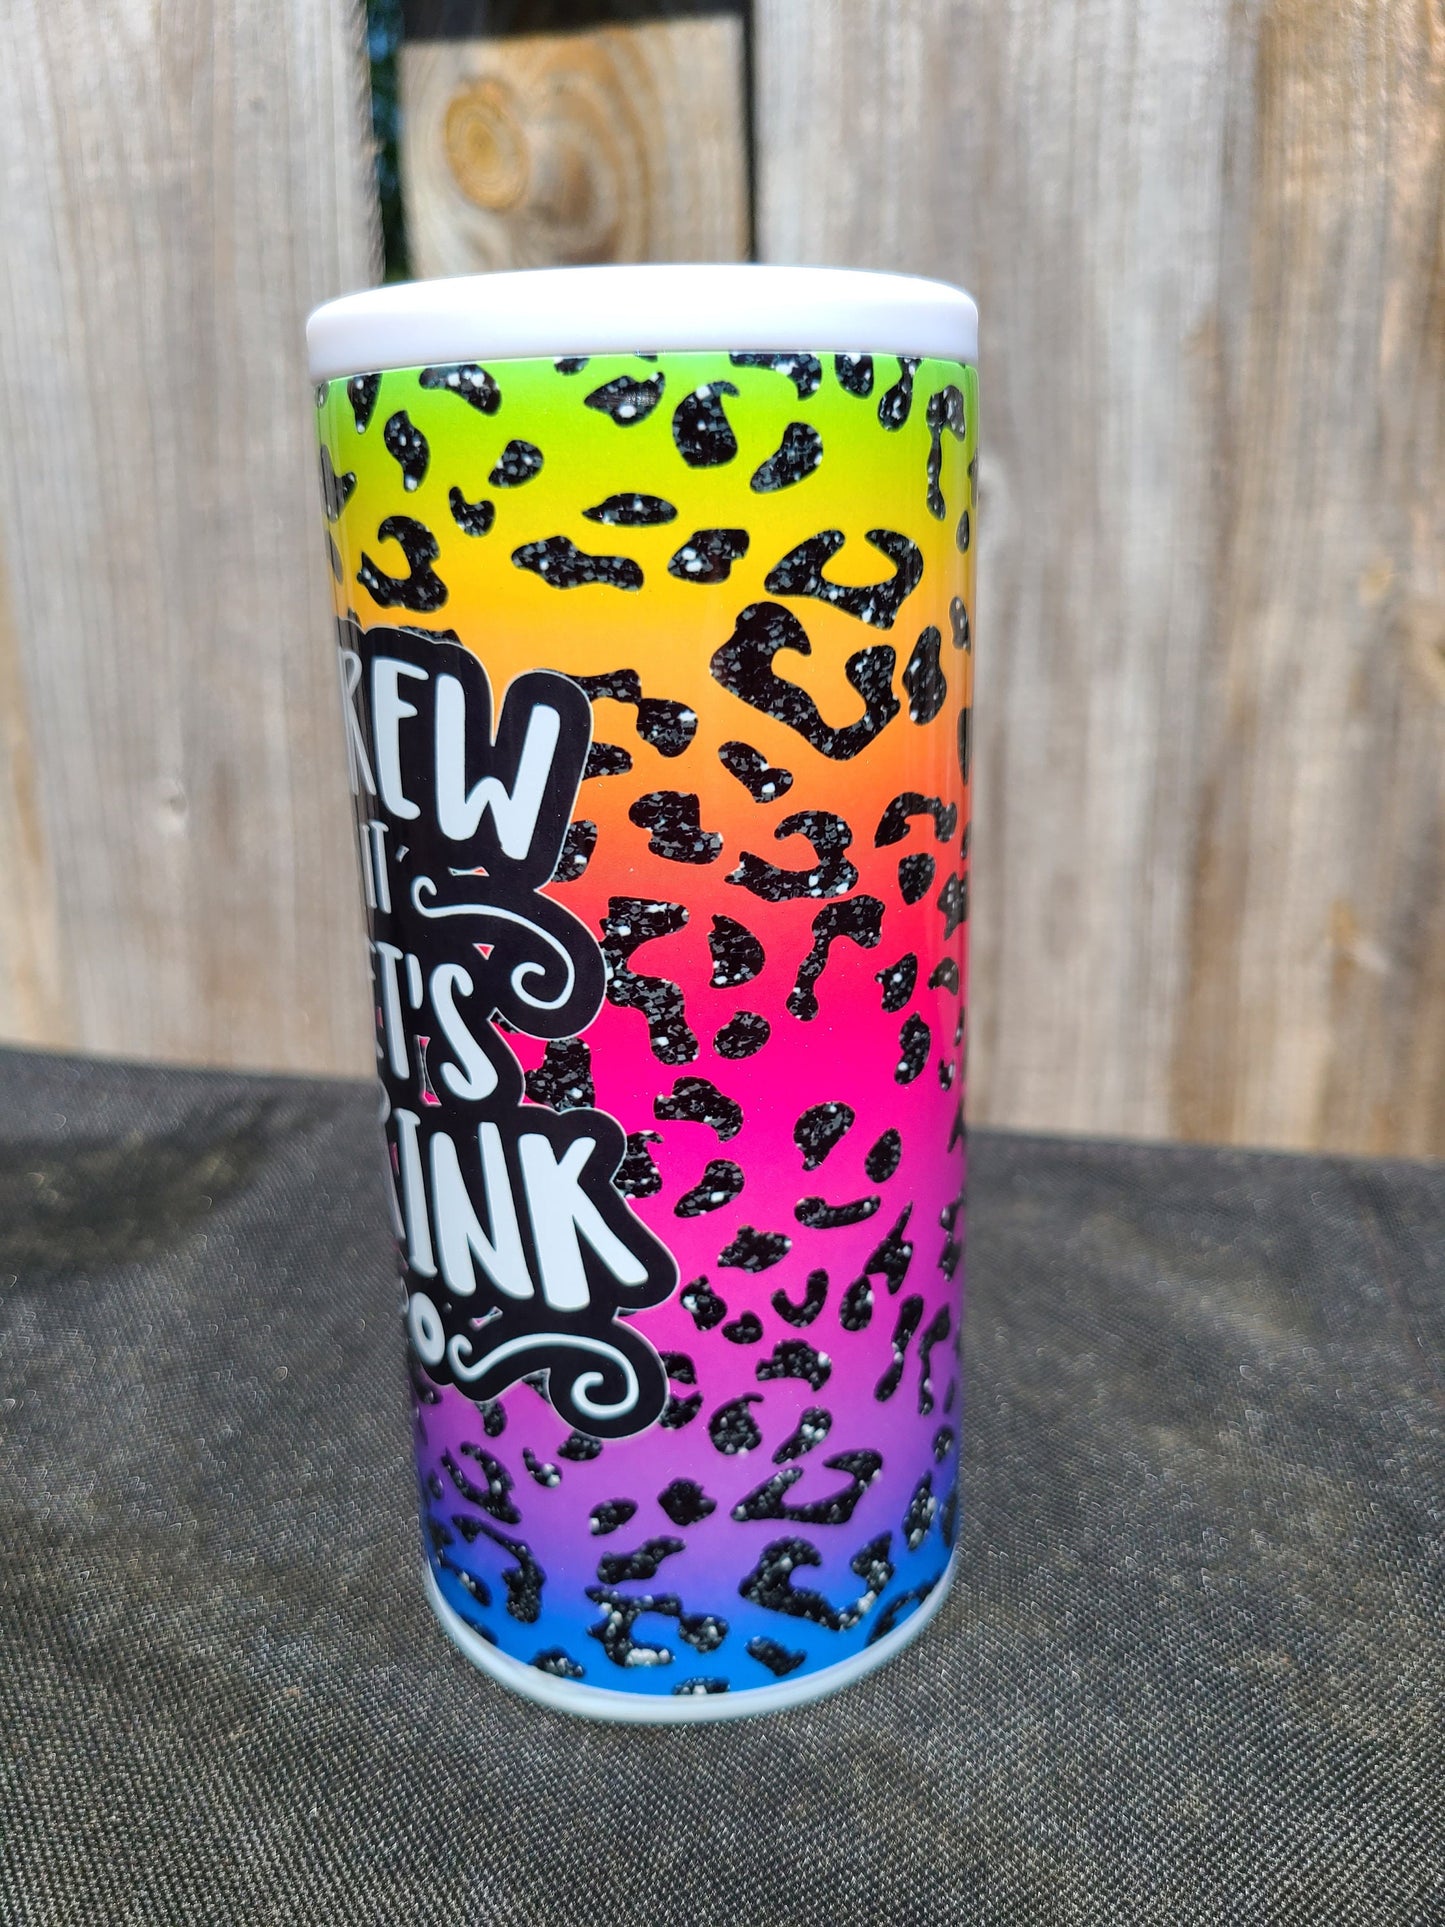 Bright Colored Leopard Print Skinny Can Cooler - Screw It Let's Drink